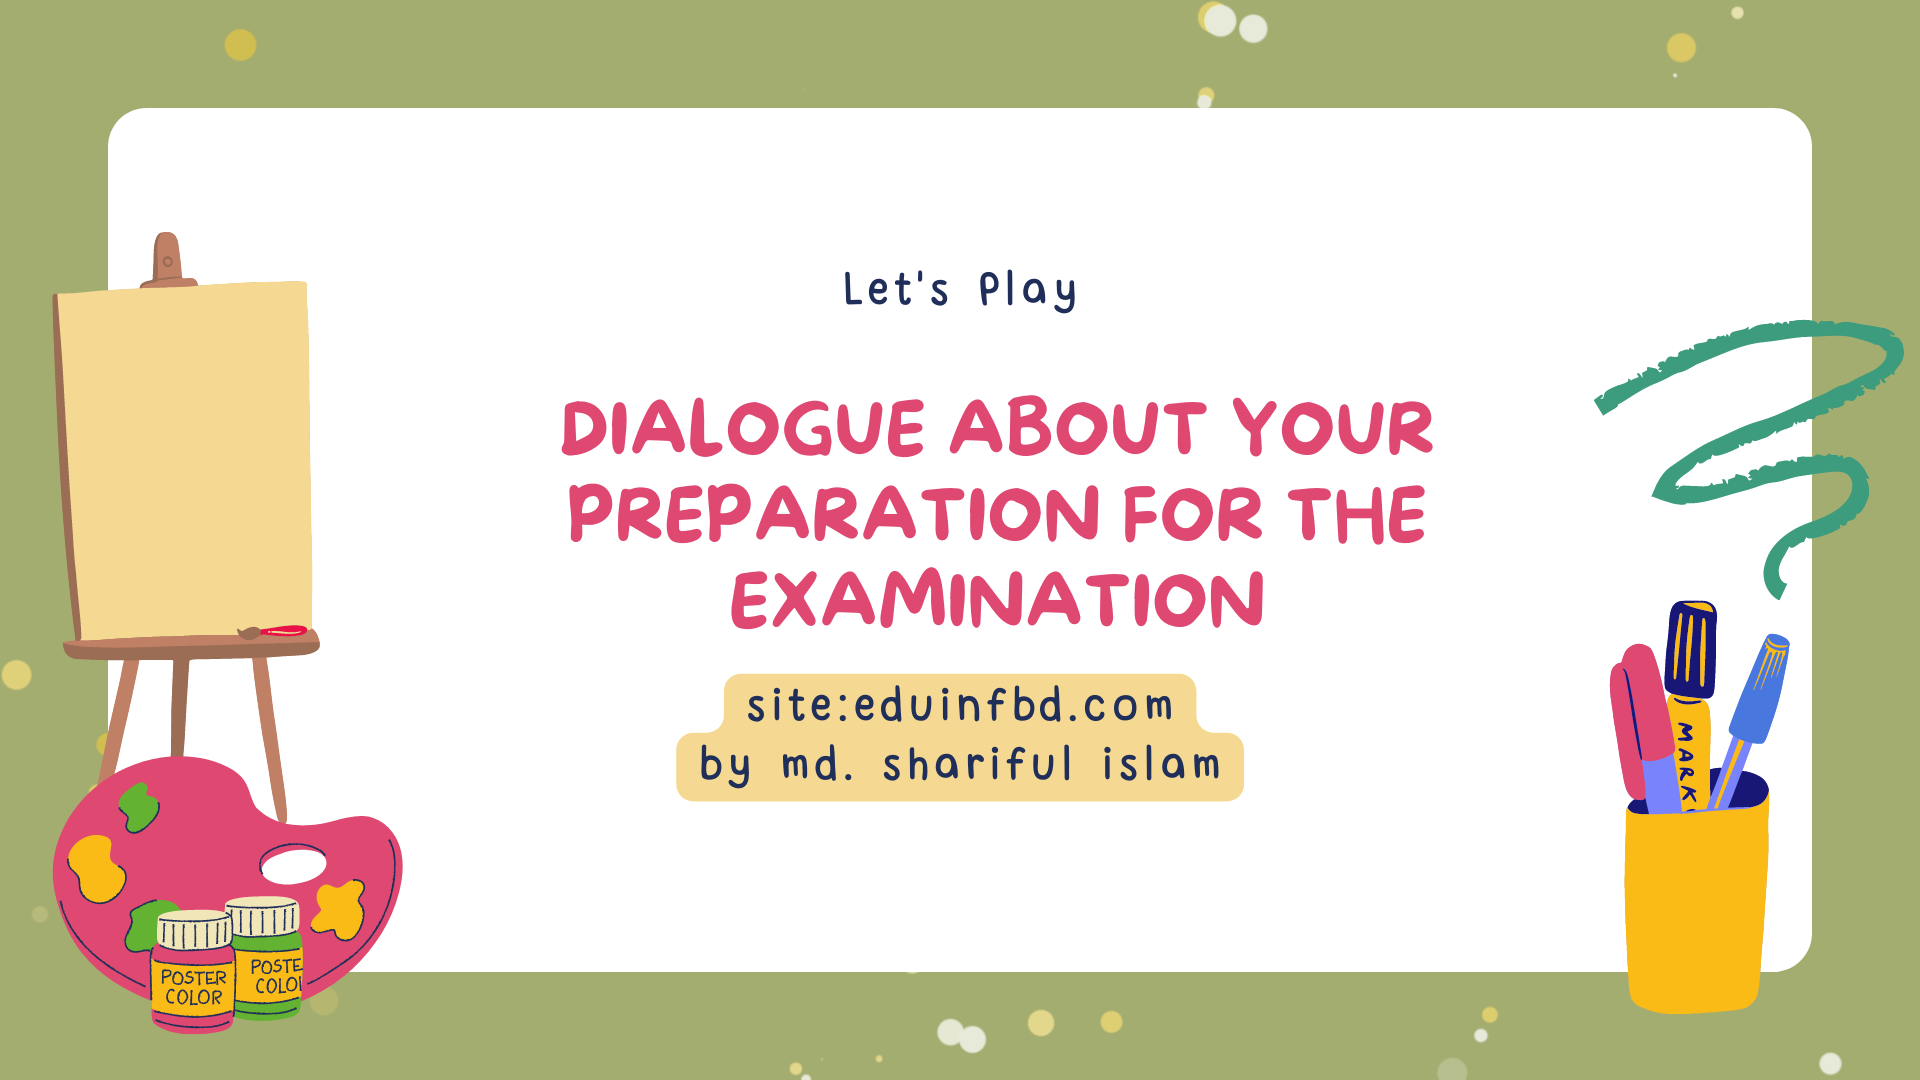 Dialogue about your preparation for the examination